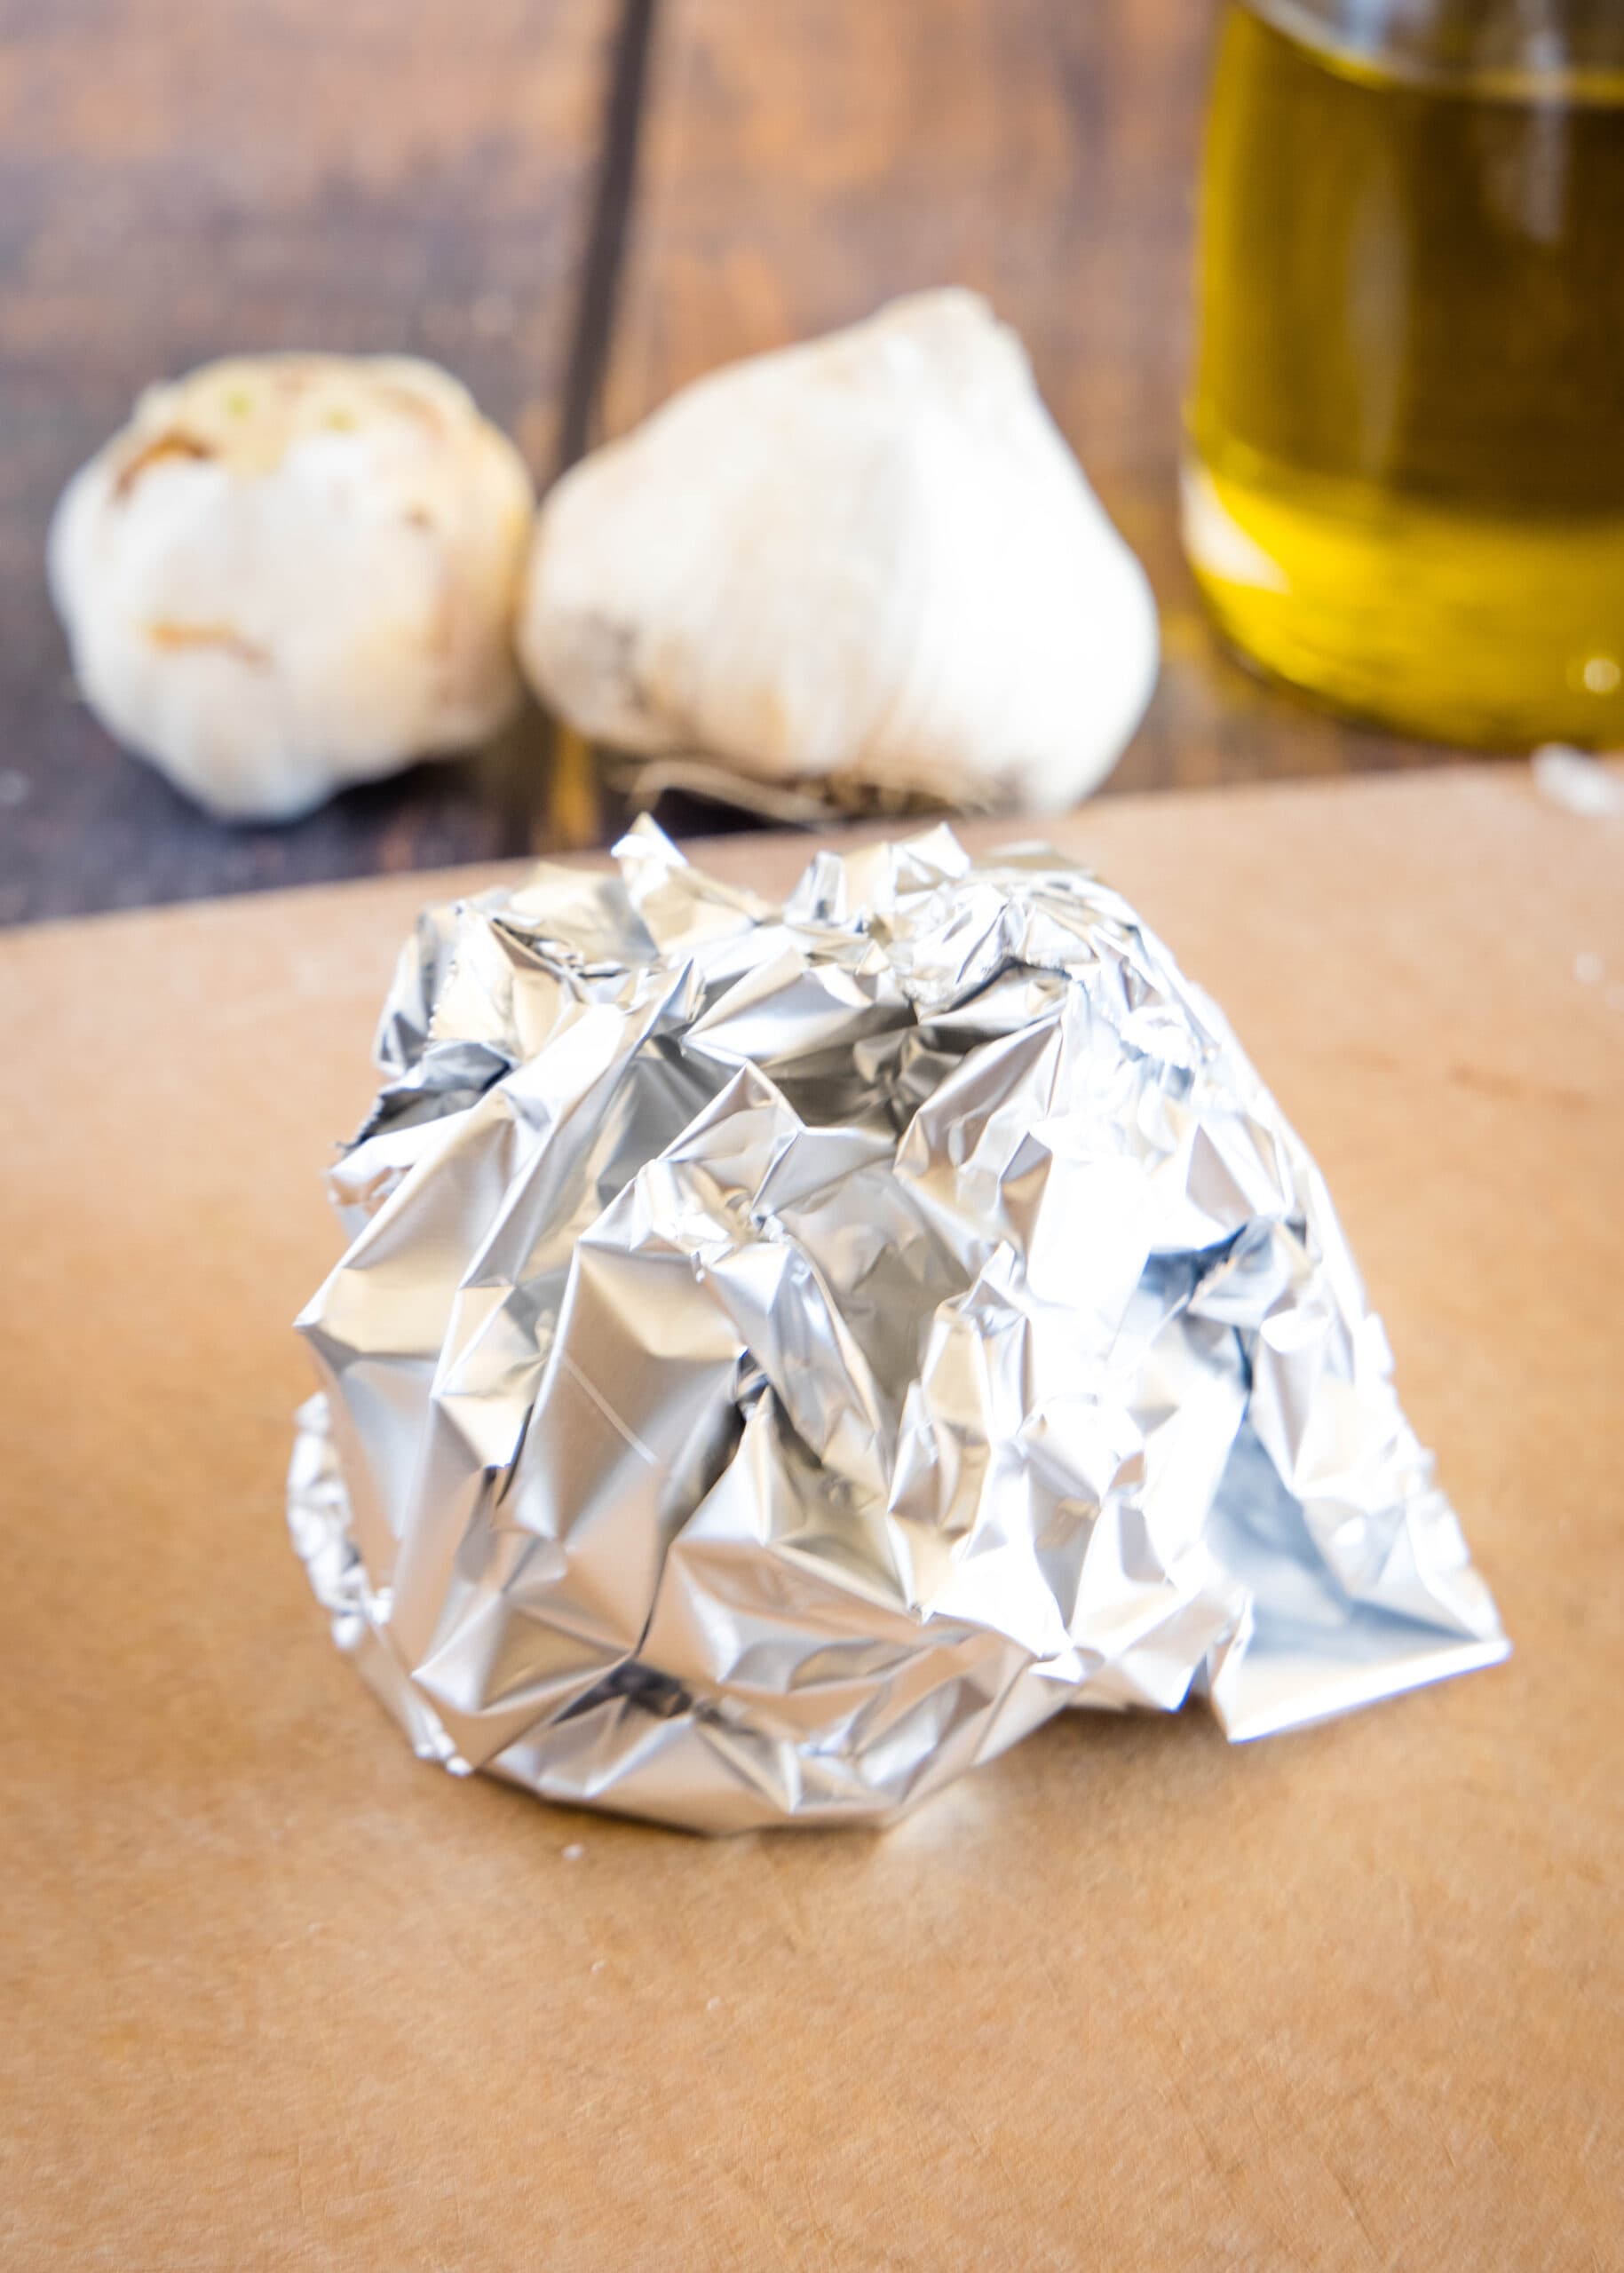 ball of aluminum foil on a cutting board